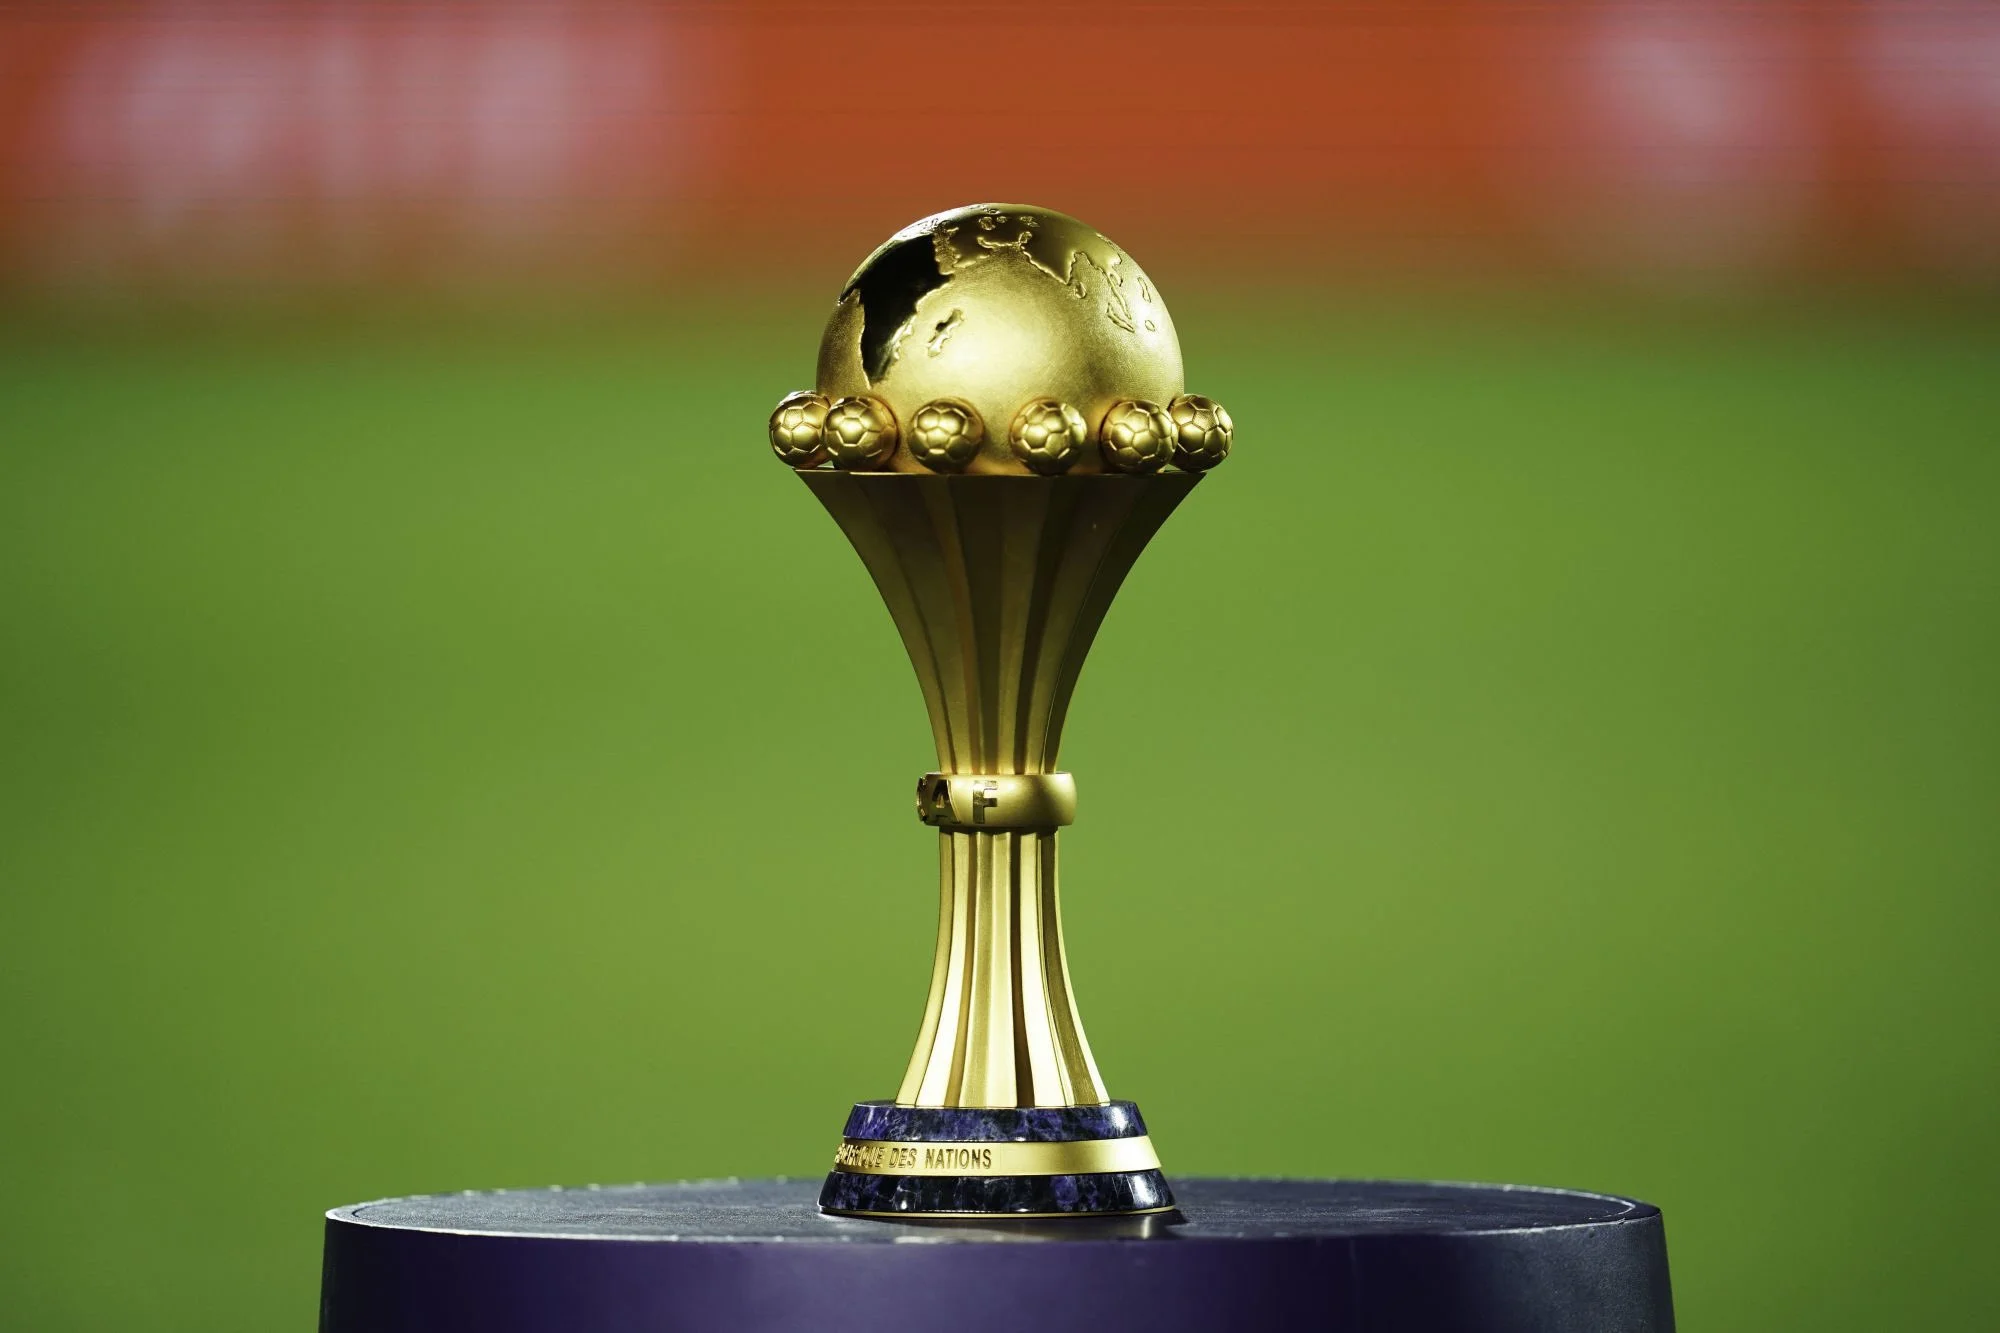 AFCON trophy. AFCON 2023 will not be available on SuperSports